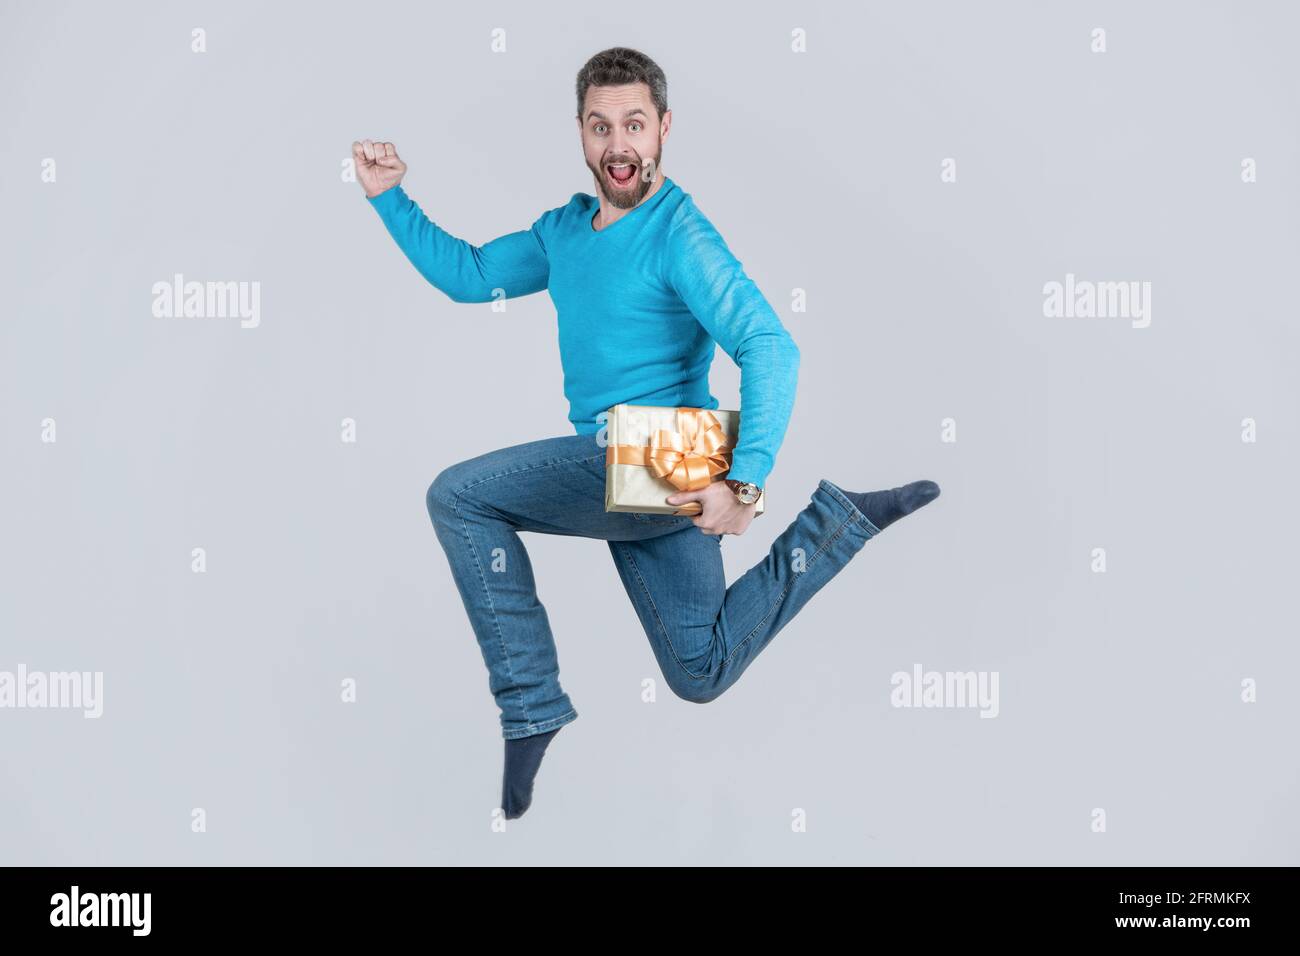 jumping handsome man with present box. businessman giving birthday gift. energetic unshaven man Stock Photo